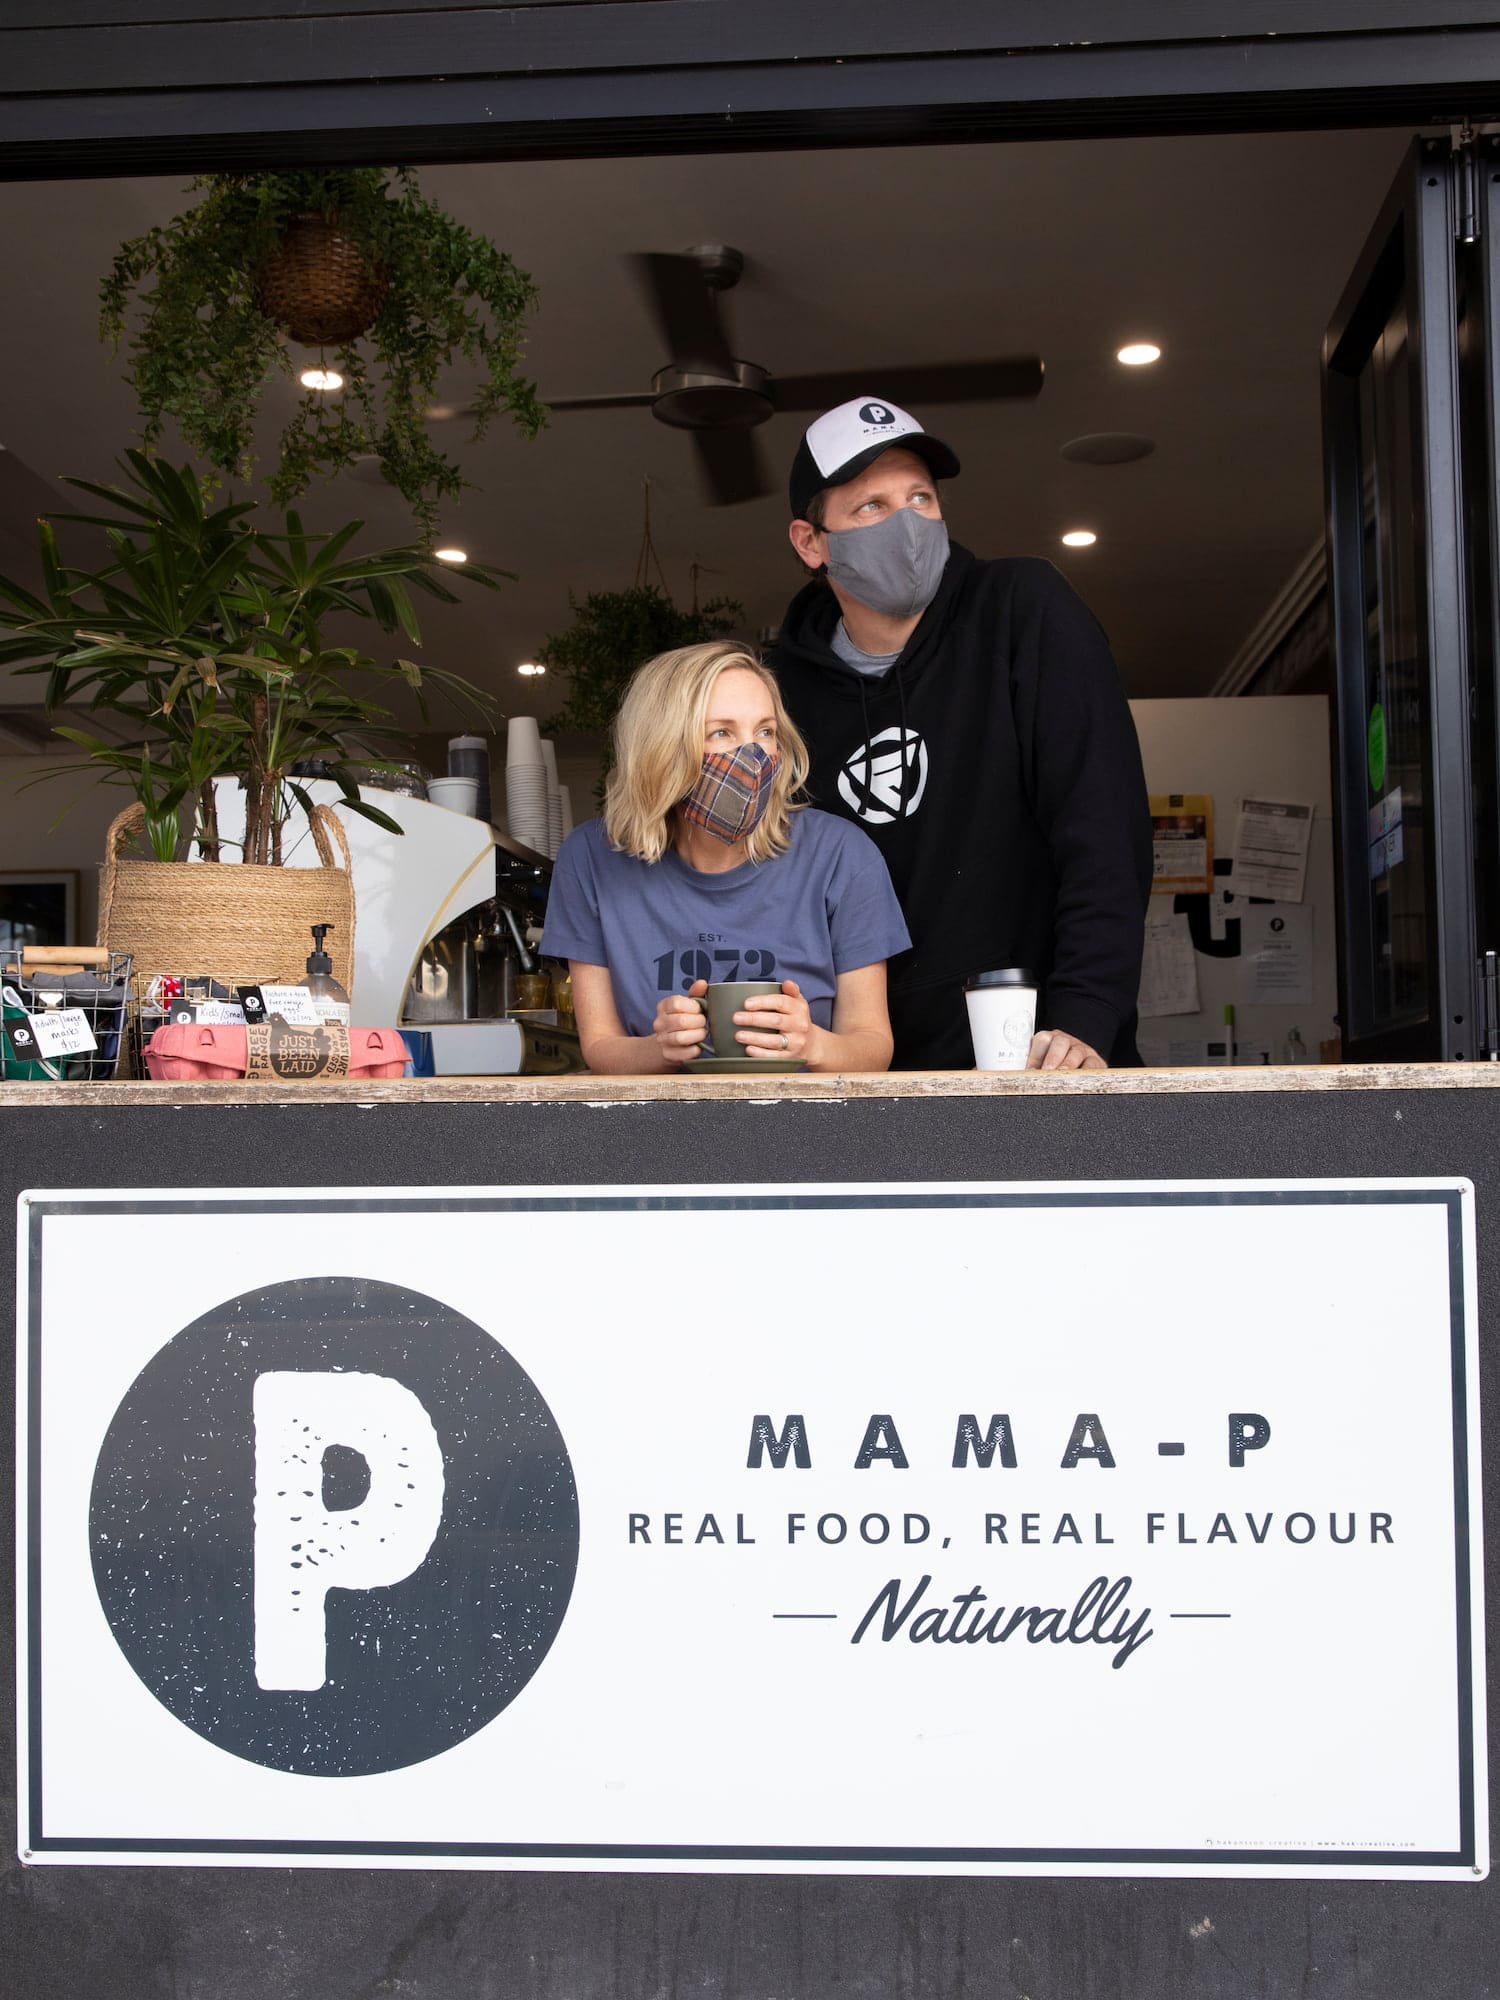 Mama-P owners Kylie and James Pheils